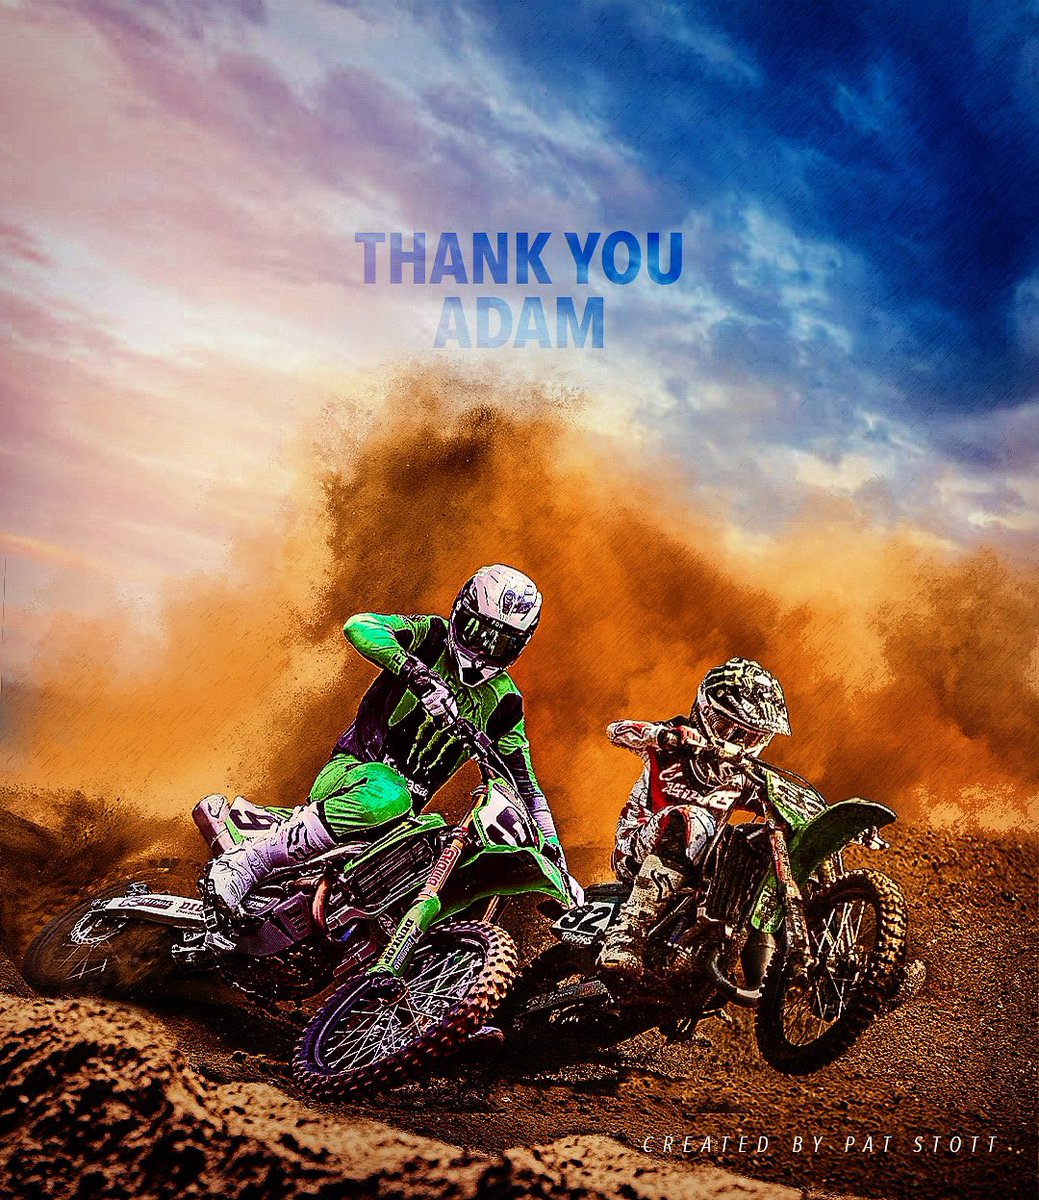 On behalf of everyone, the fans, the media, the industry - Thank You @AdamCianciarulo enjoy your last ride!